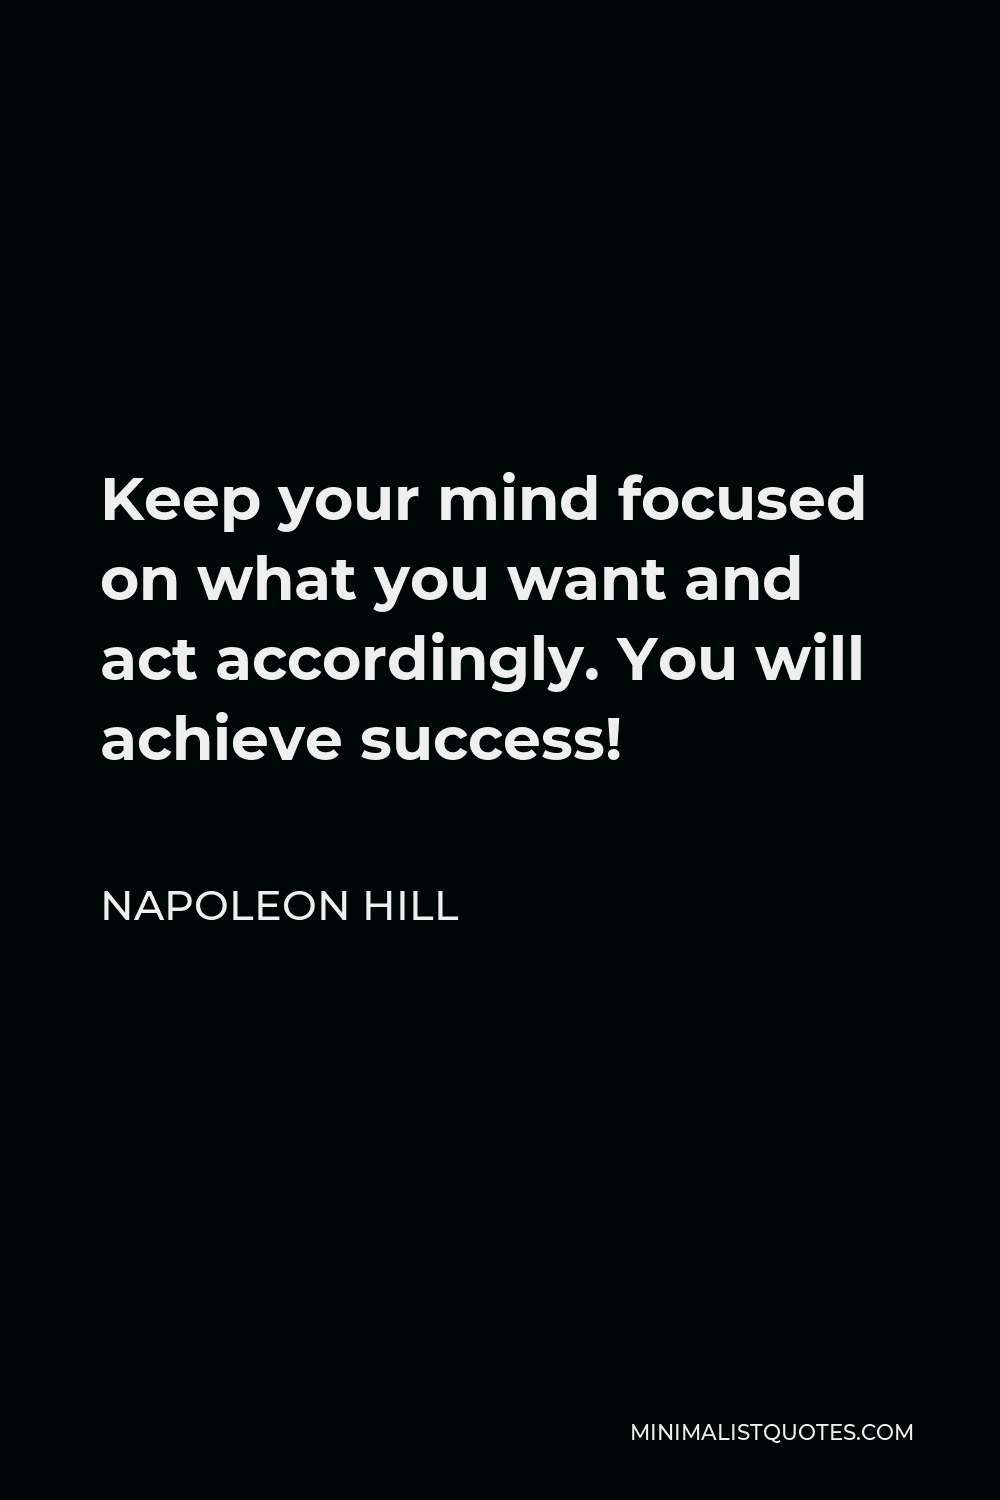 Napoleon Hill Quote - Keep your mind focused on what you want and act accordingly. You will achieve success!